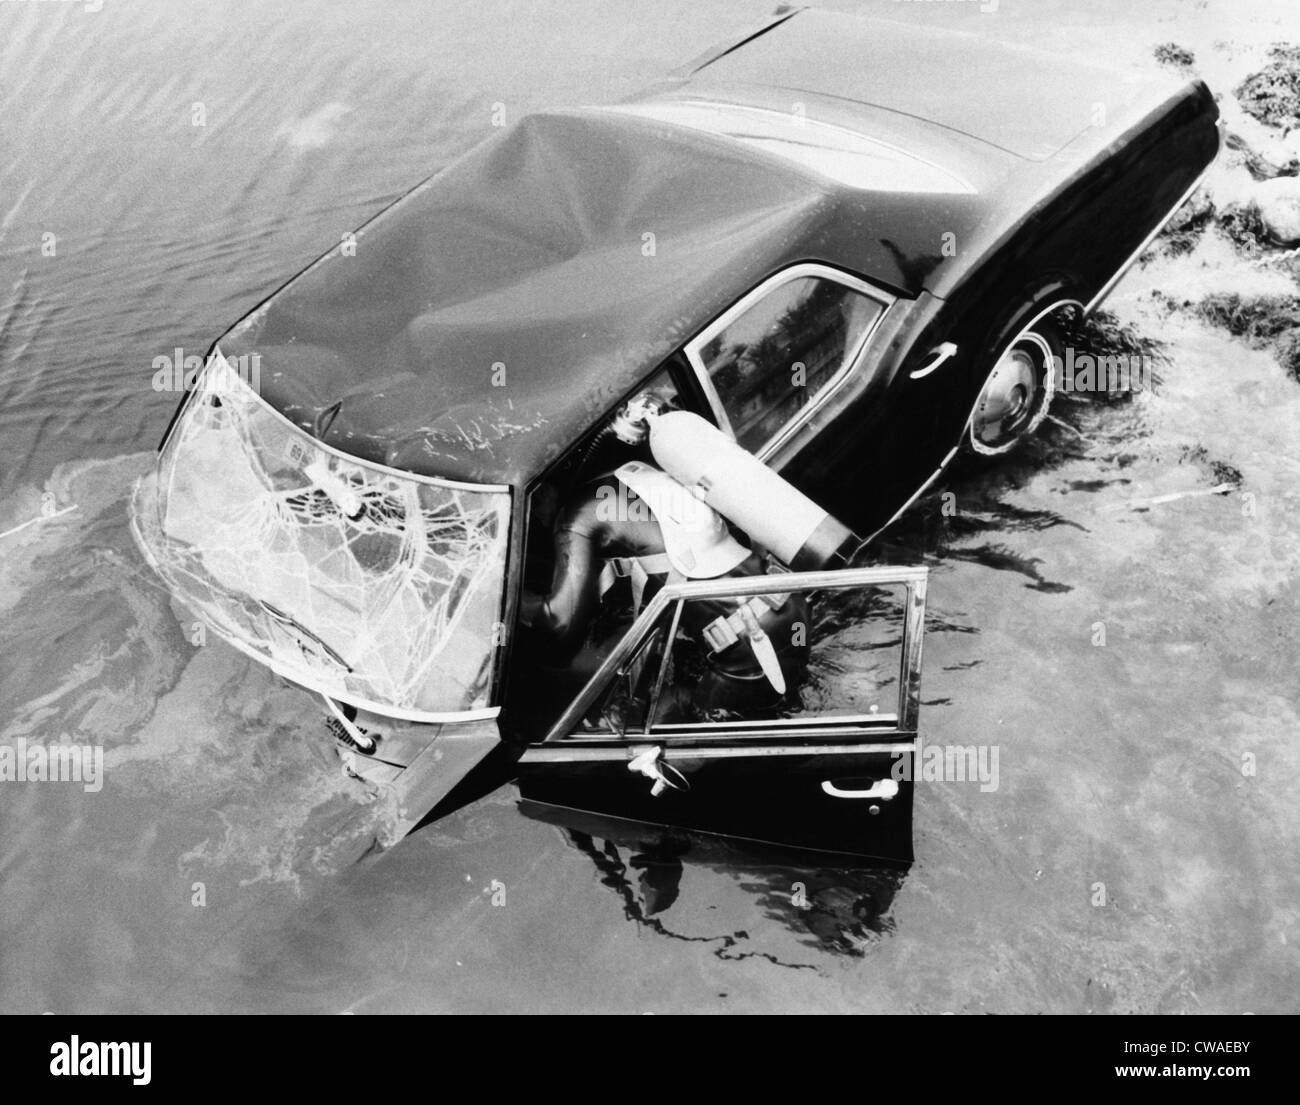 Diver investigating Edward Kennedy's 1967 Oldsmobile in Willamette River after July 18, 1969, accident that killed Mary Jo Stock Photo